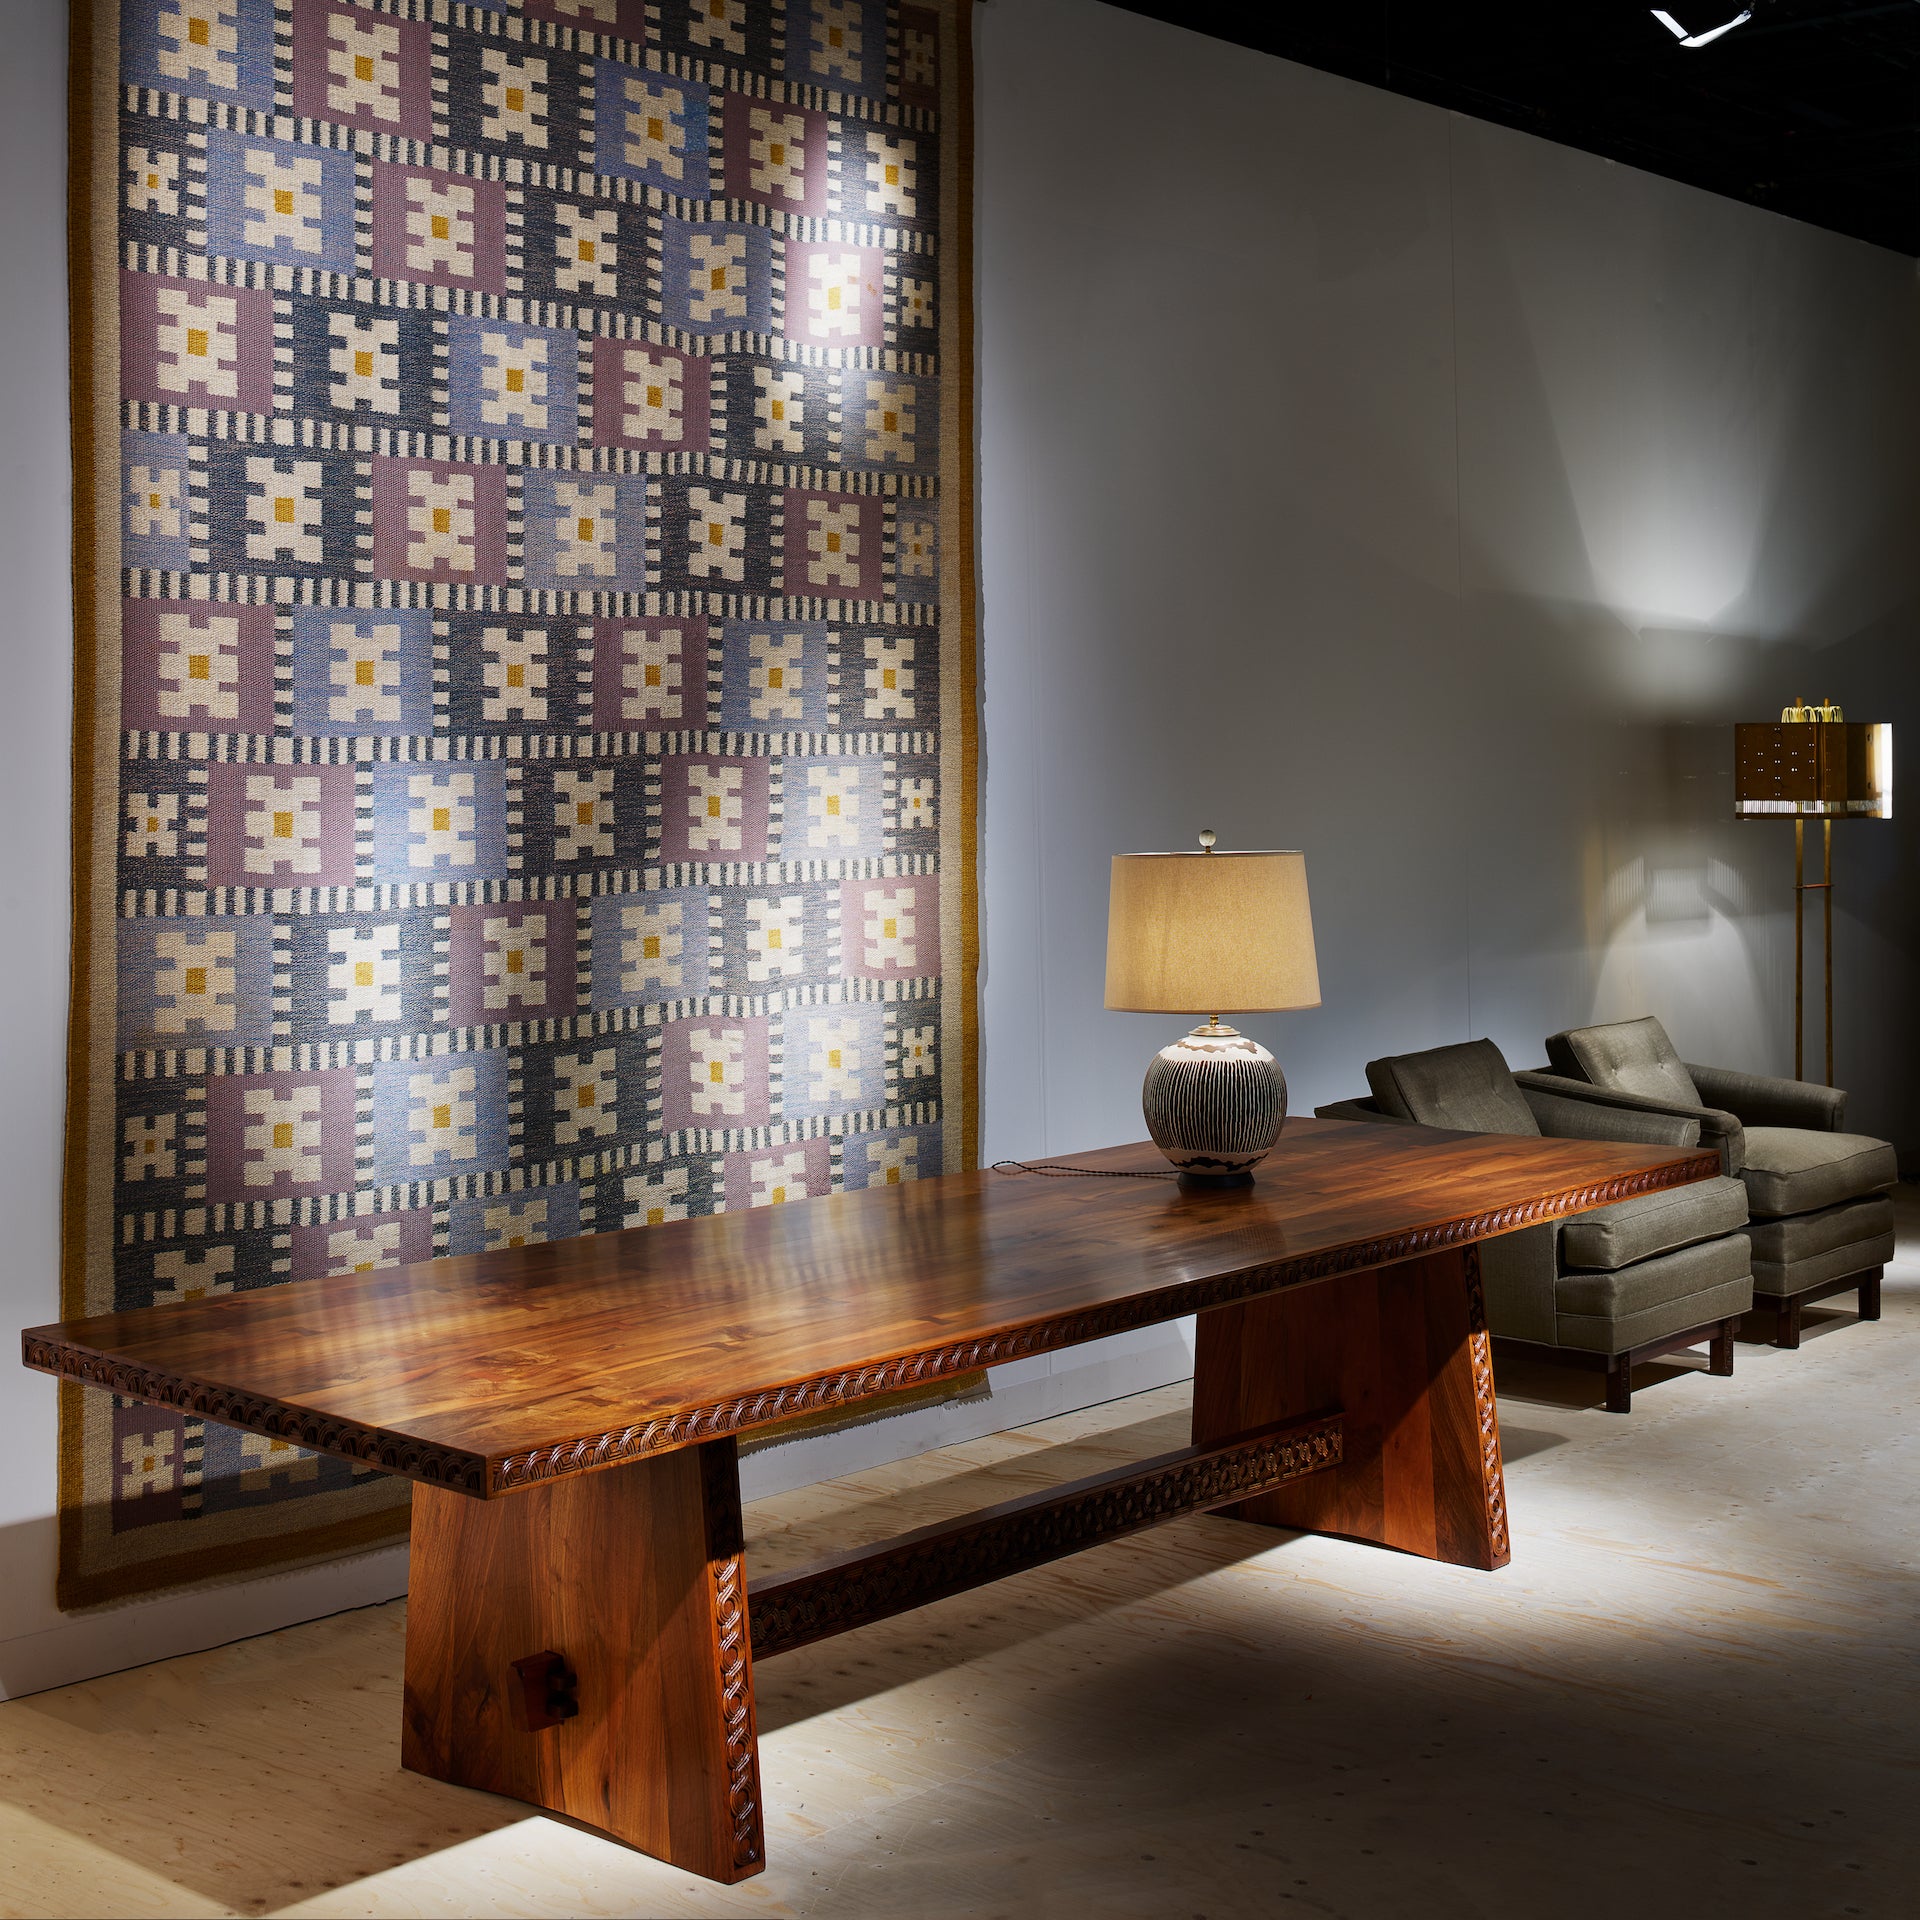 Walnut Table by Dénies György (c. 1920) and Anémones des Bois Tapestry by Sigvard Bernadotte (c. 1940), presented by Galerie Eric Philippe at Design Miami/ Basel 2023. Photo © James Harris for Design Miami/ Basel